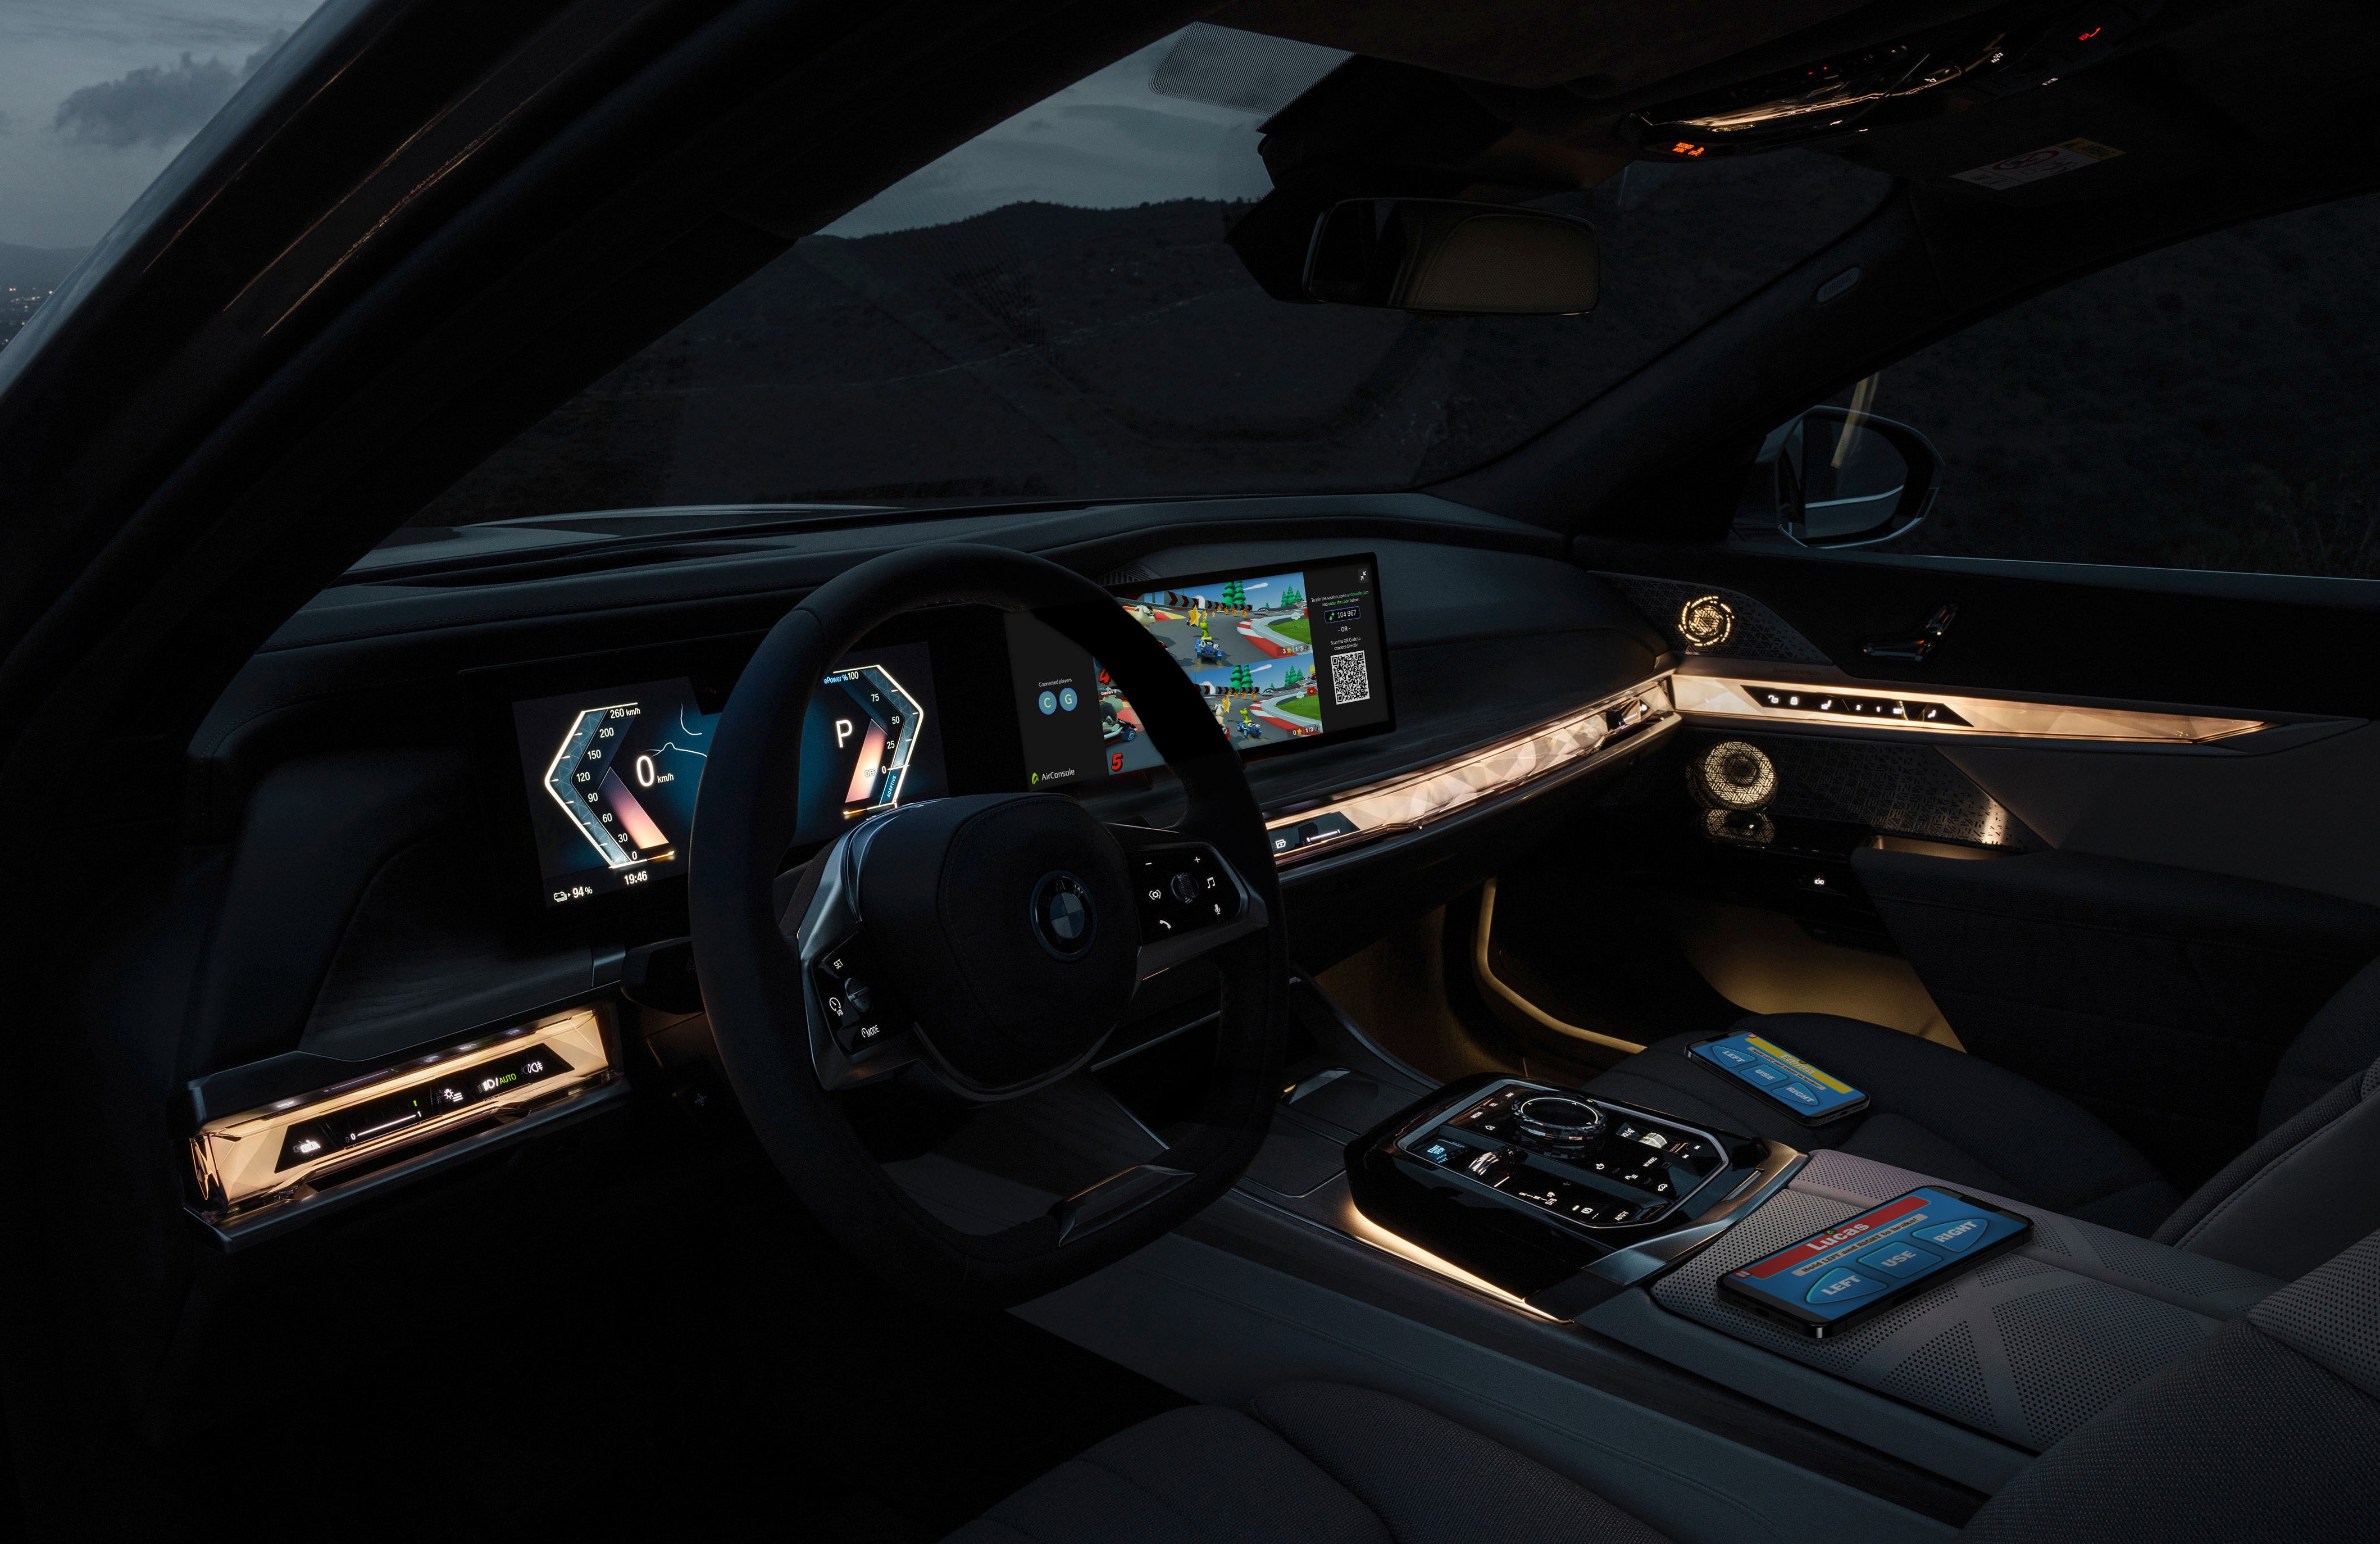 inside shot of a BMW car at night with a game running